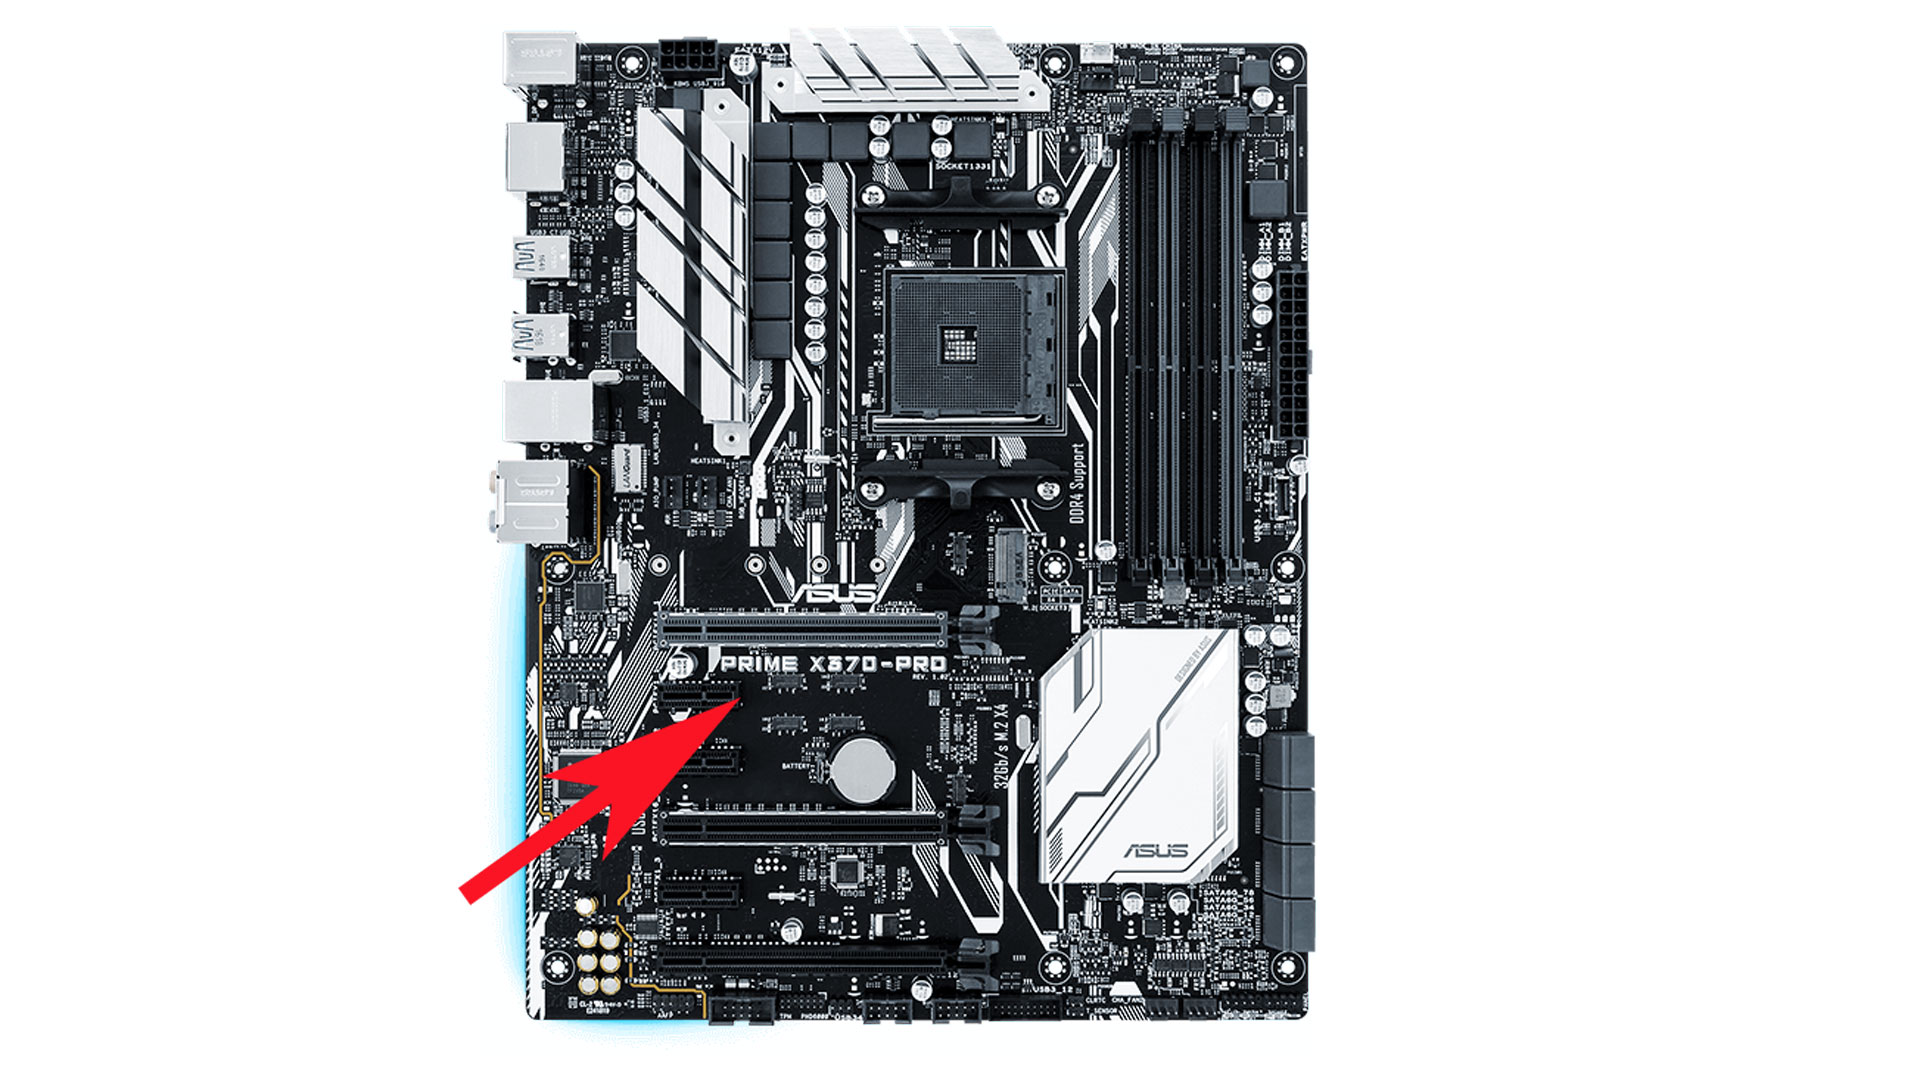 How to Check What Motherboard You Have